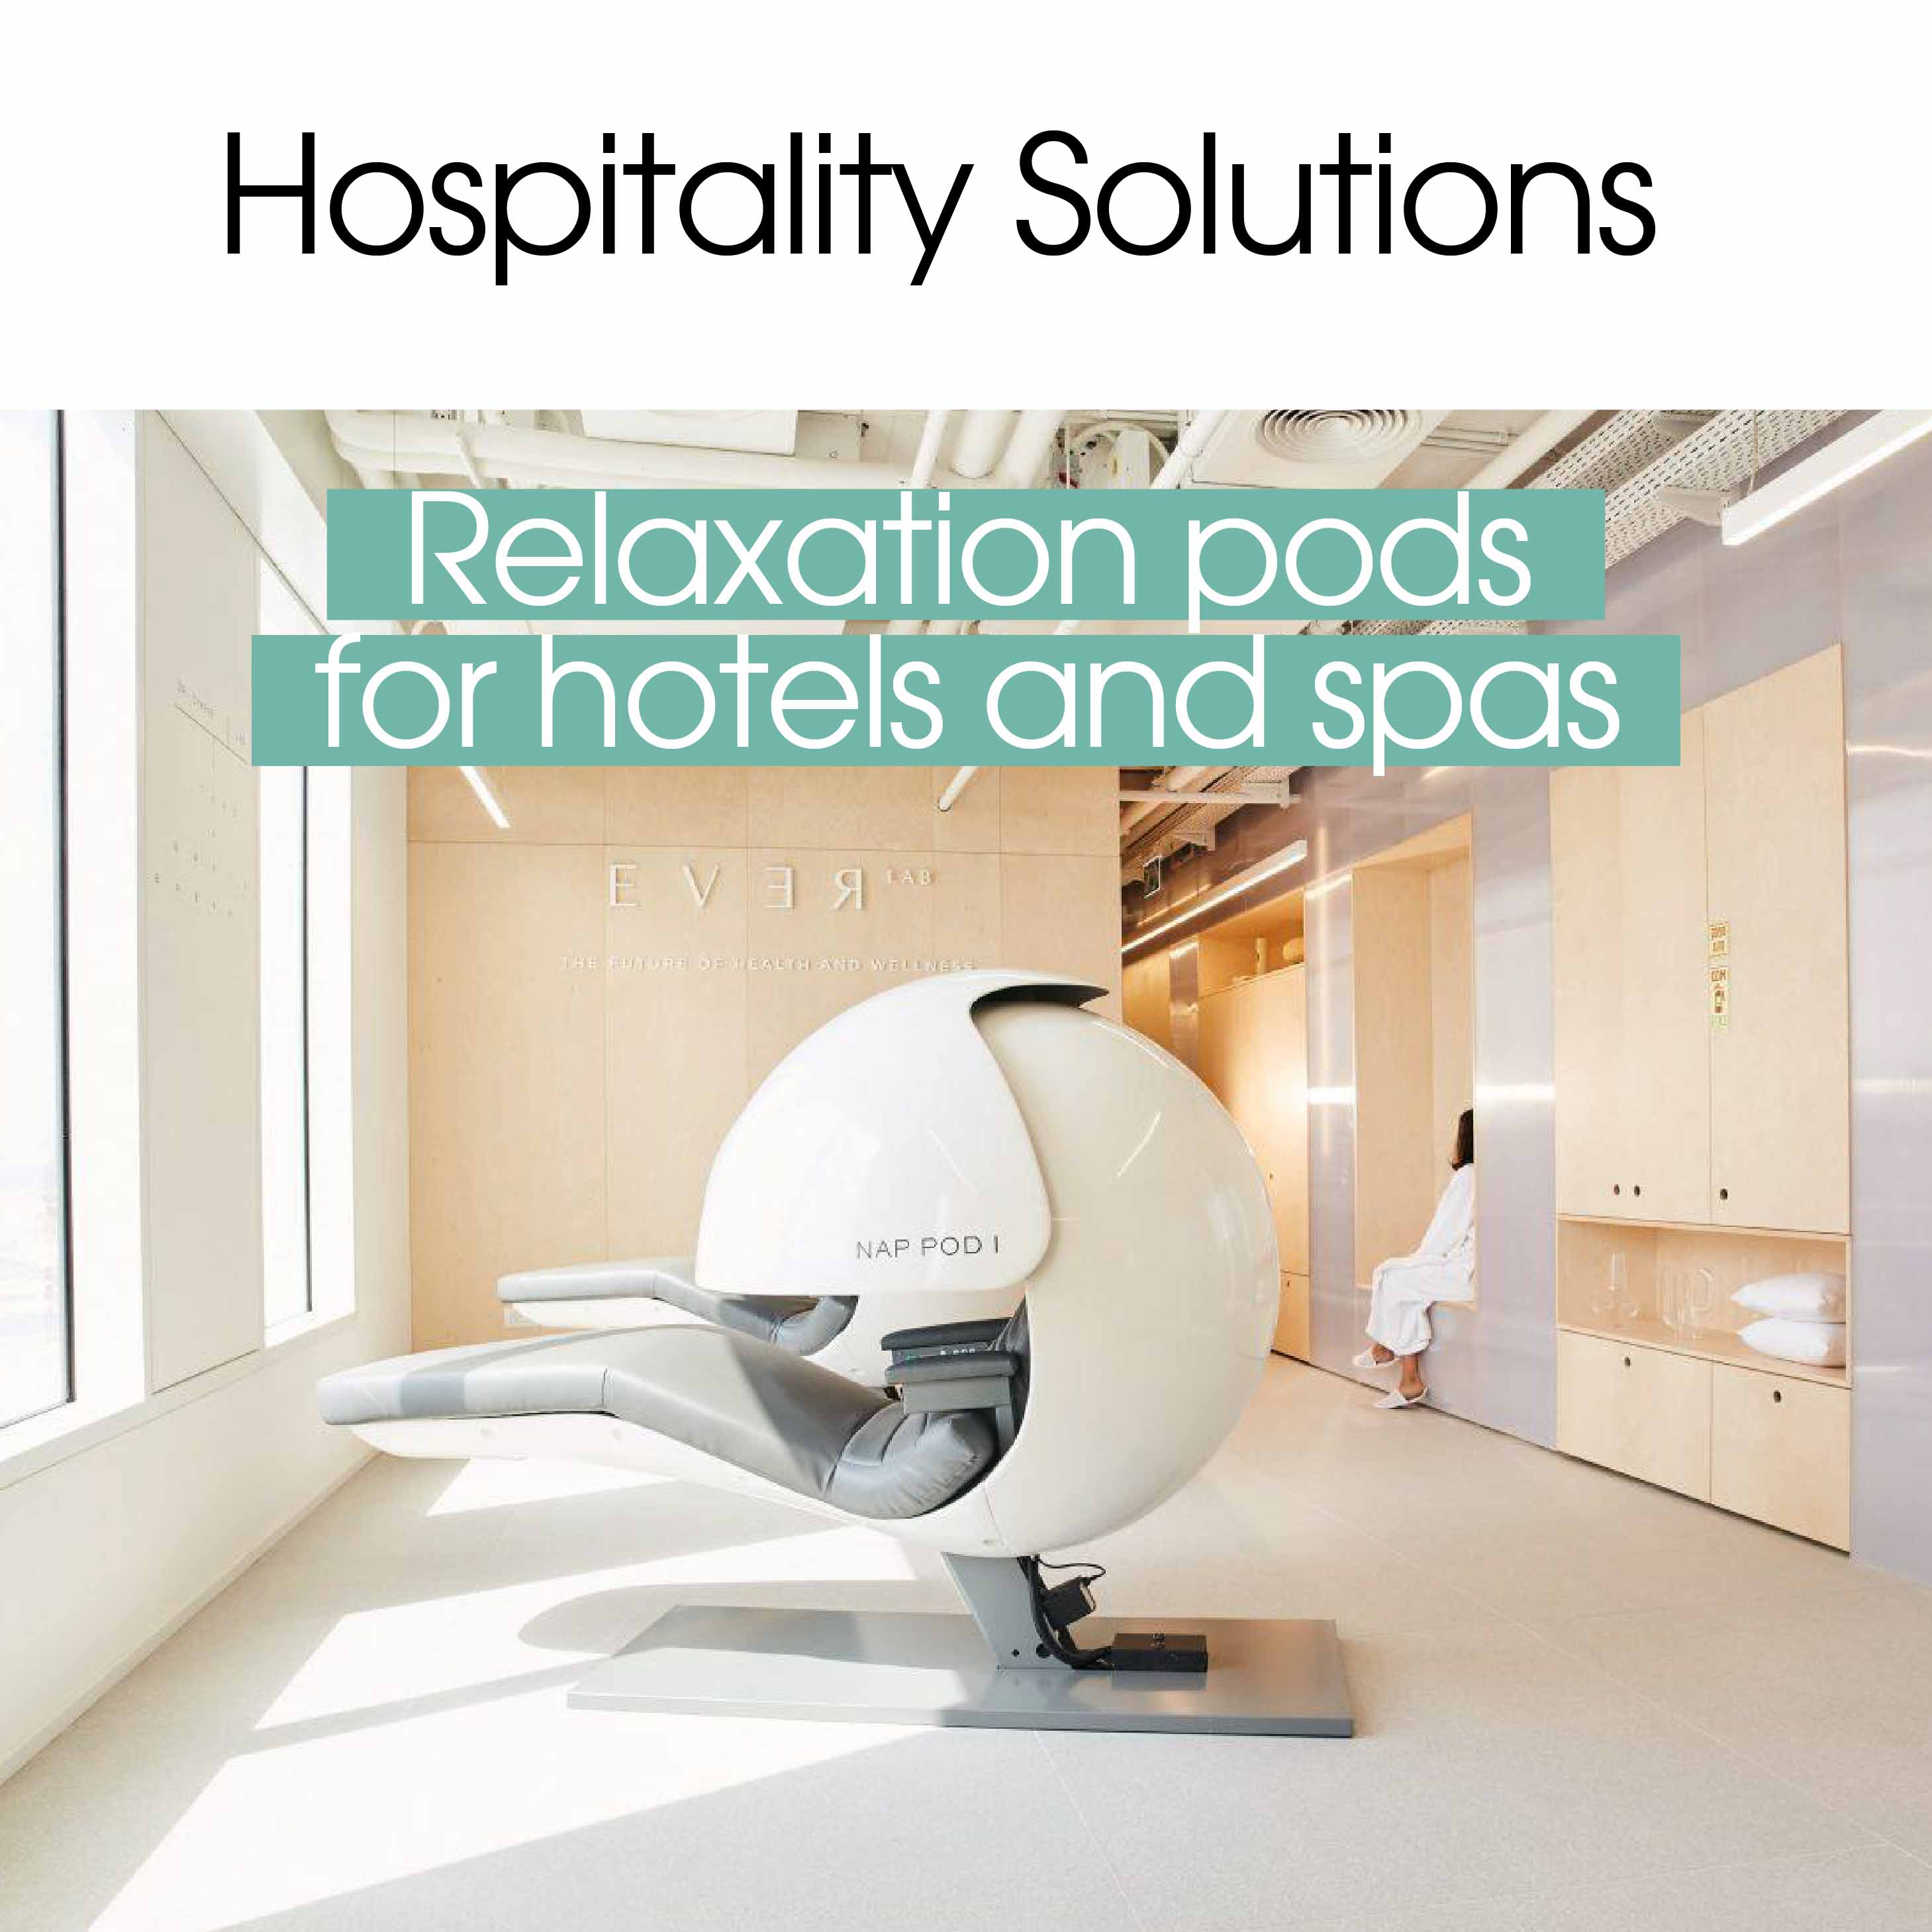 Hospitality Solutions | Relaxation pods for hotels and spas